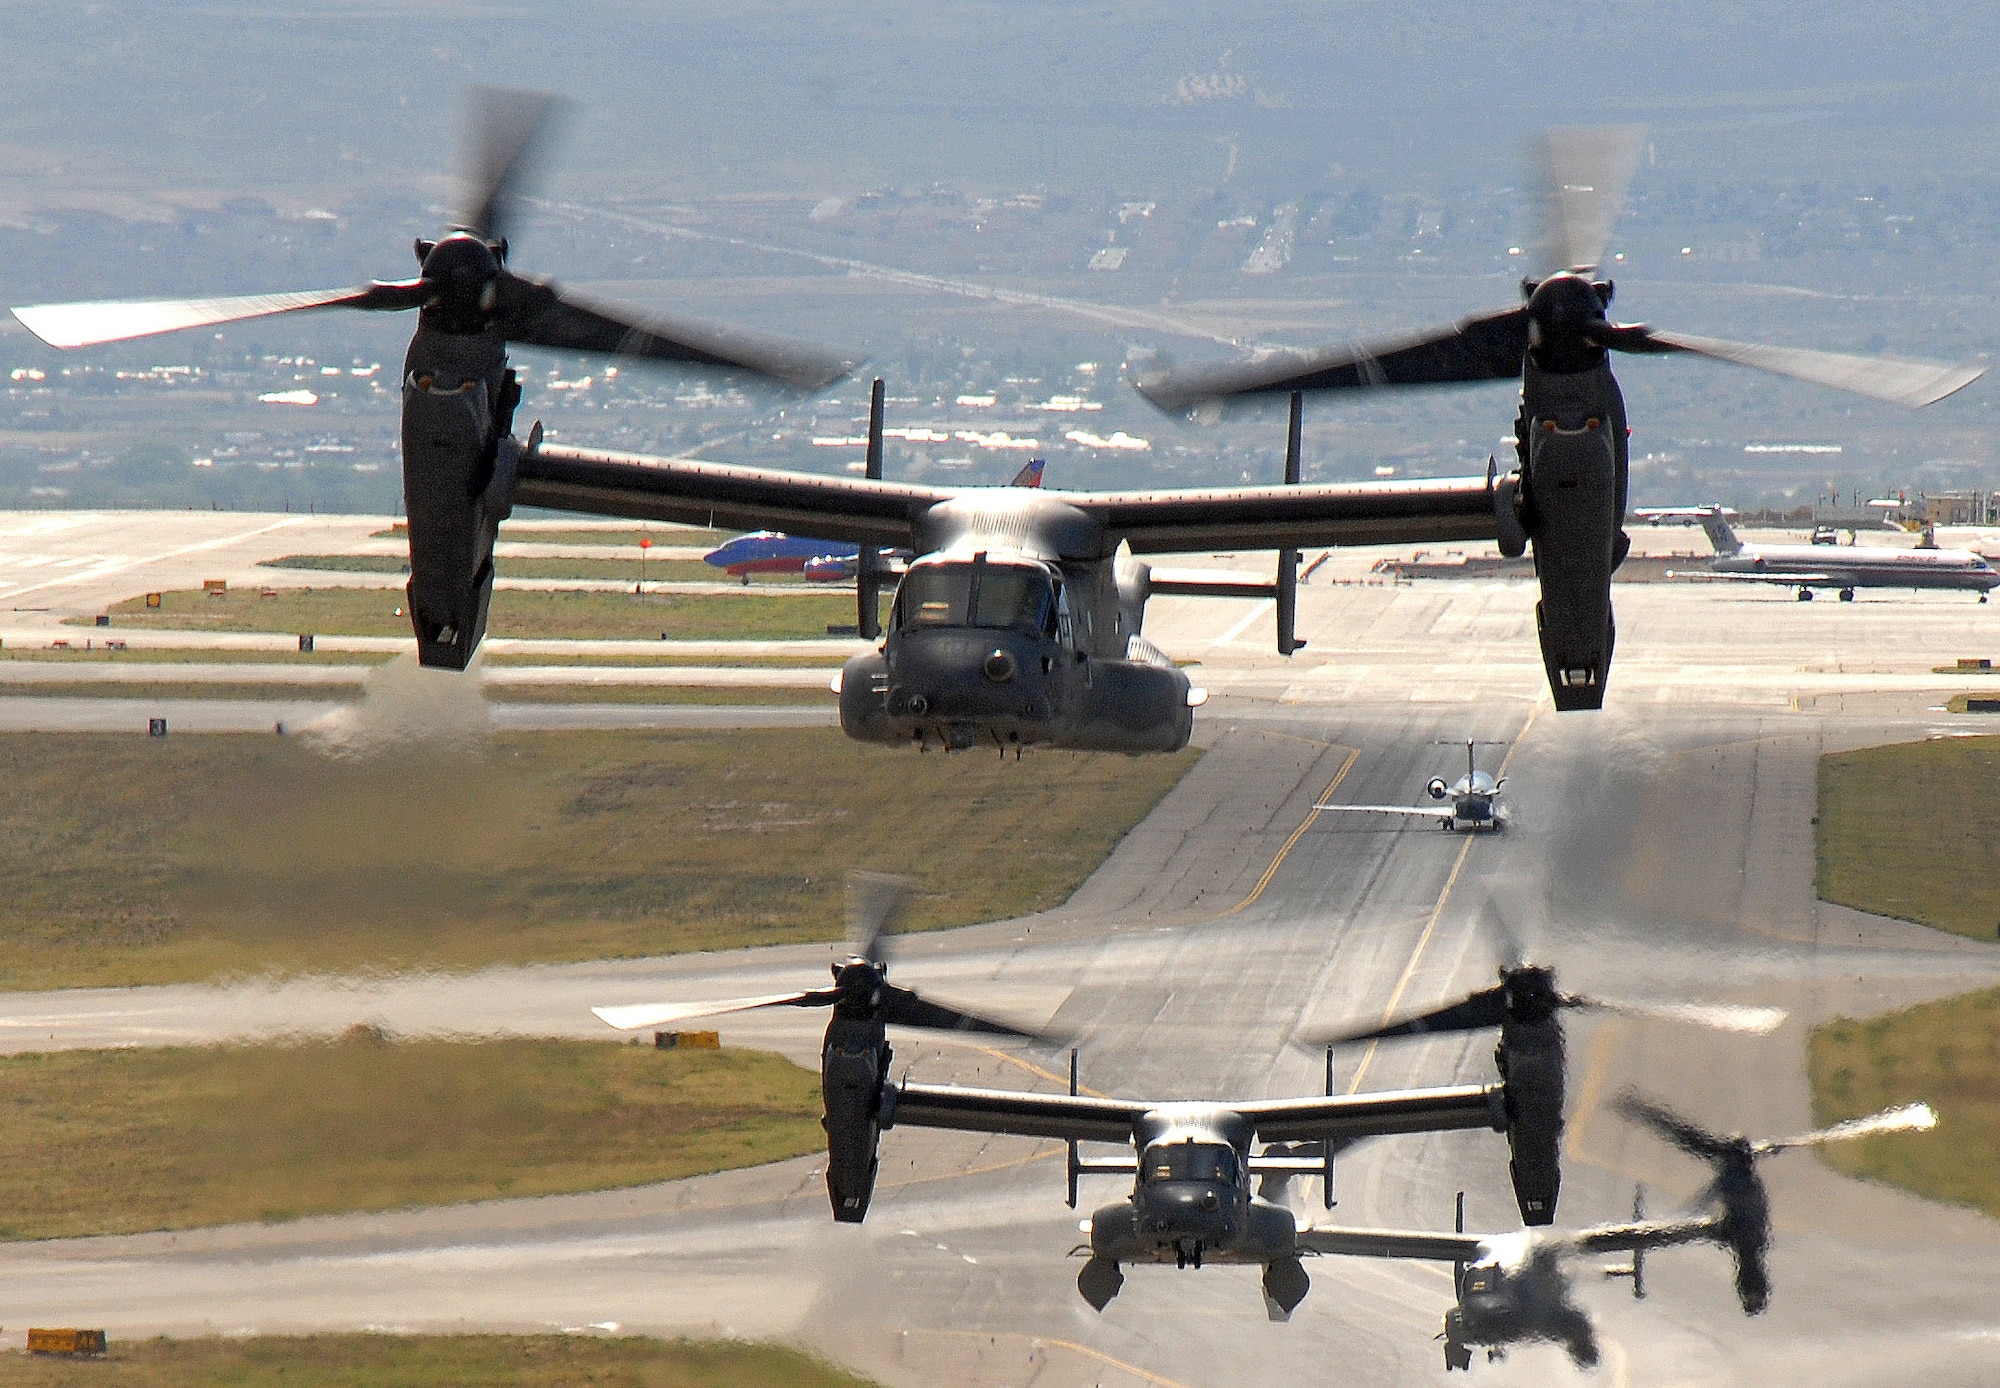 Air Force CV-22 Ospreys take off from a Kirtland Air Force Base, N.M. May 1 for a training mission.  The Osprey is a tiltrotor aircraft that combines vertical takeoff, hover and landing qualities of a helicopter with the normal flight characteristics of a turboprop aircraft.  (U.S. Air Force photo/Staff Sgt. Markus Maier)